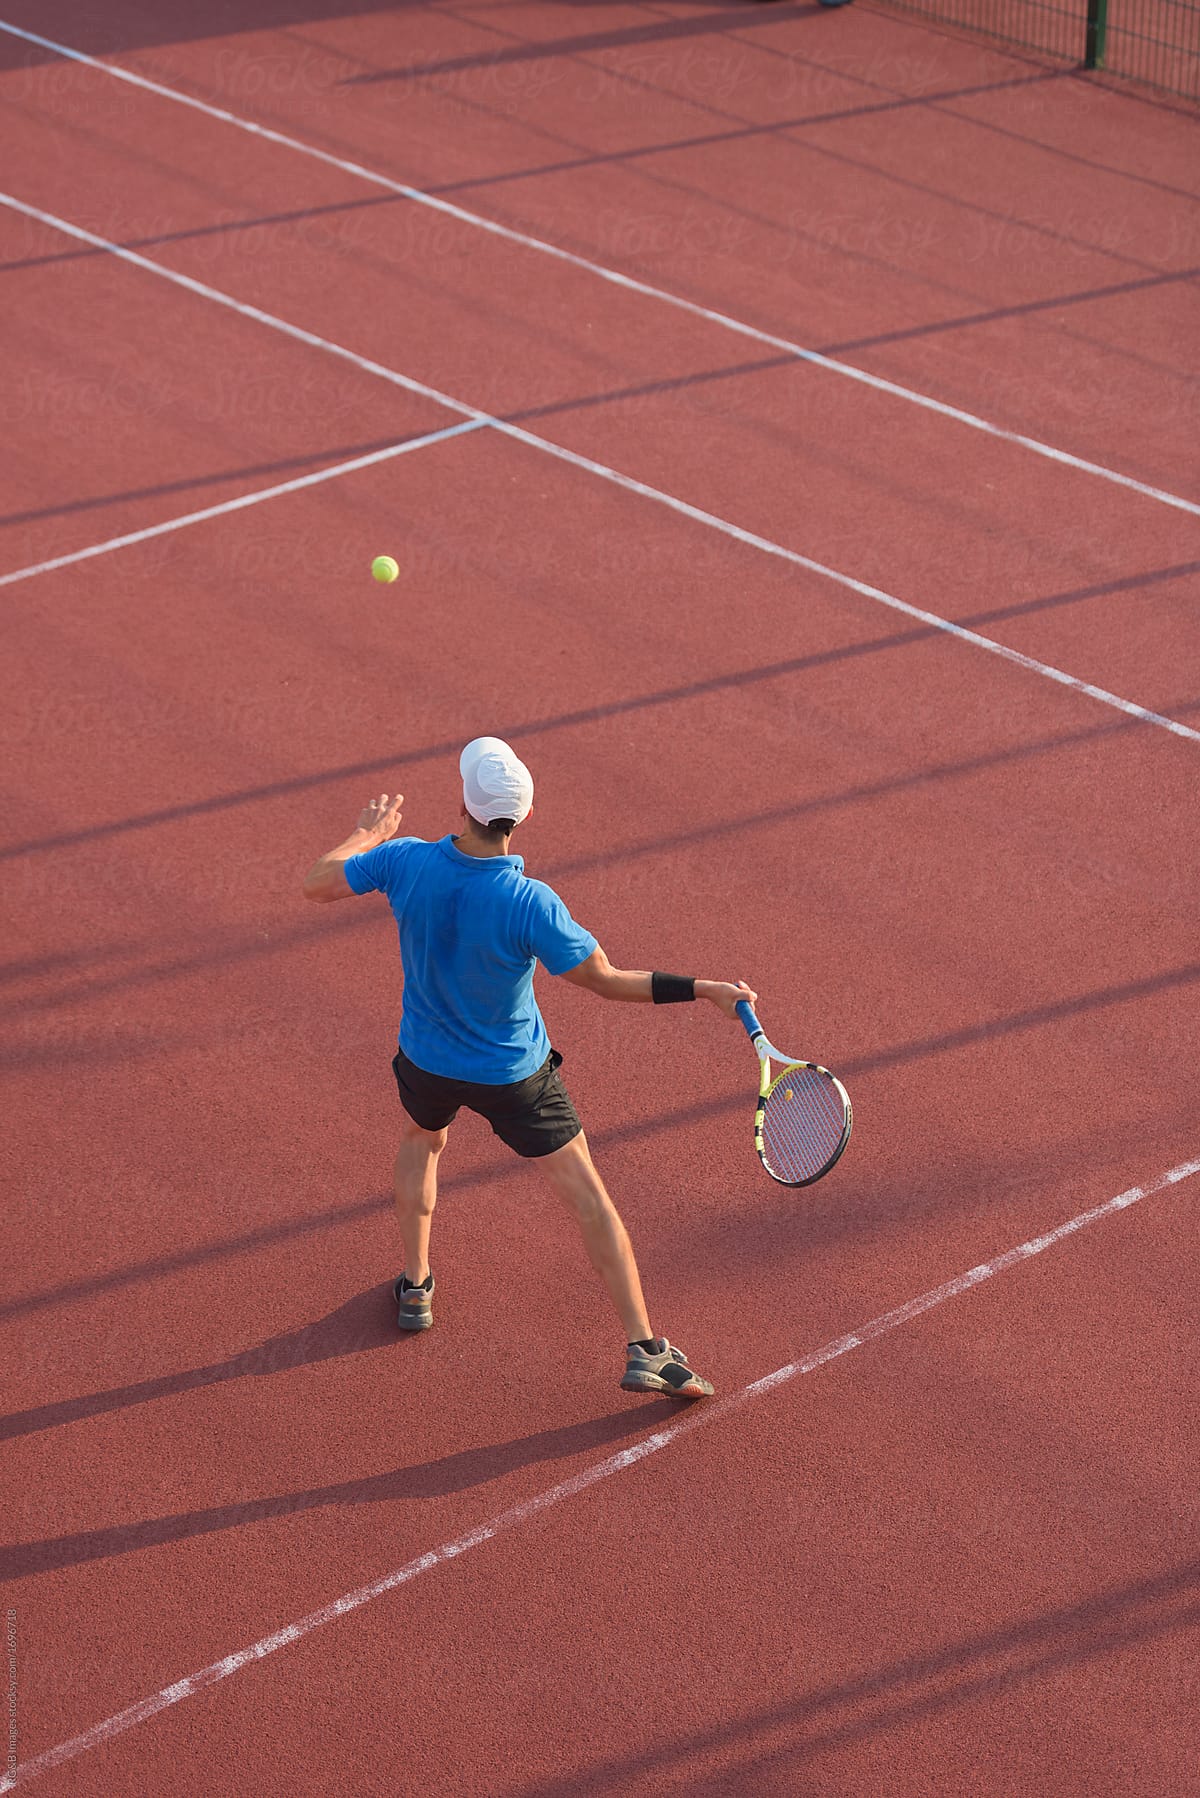 Tennis player doing a forehand stroke